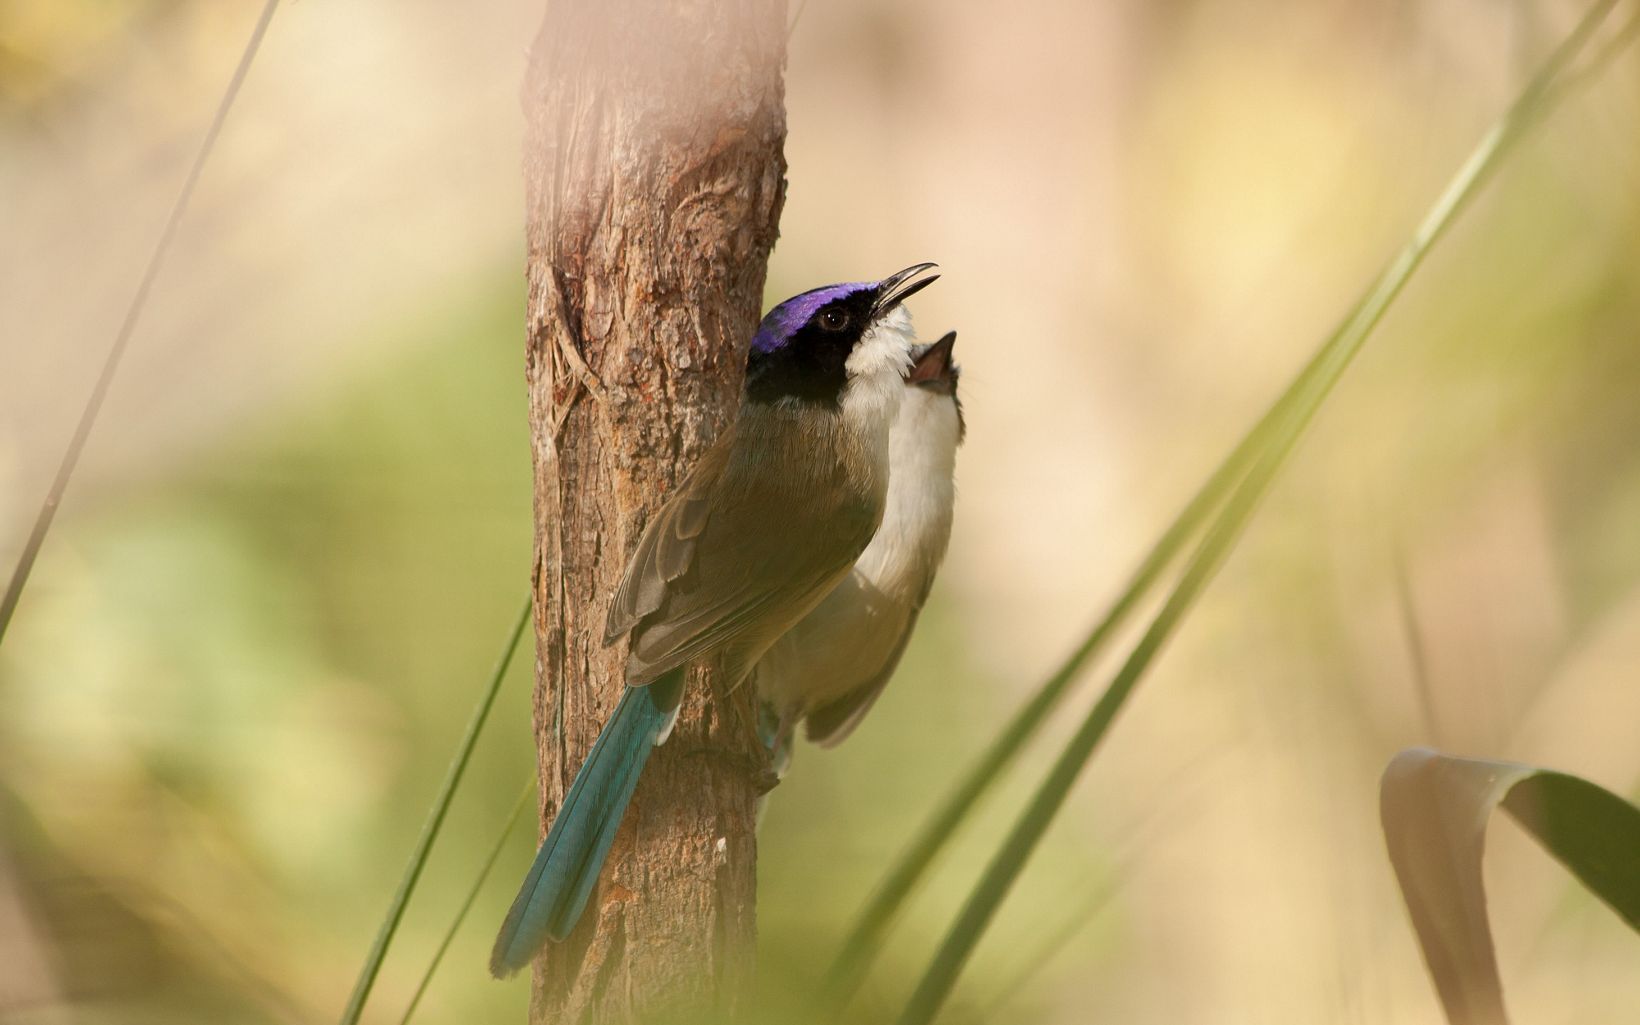 Purple-crowned Fairy-wren is a riparian habitat specialist that occurs in patches of dense river-fringing vegetation. © Gina Barnett